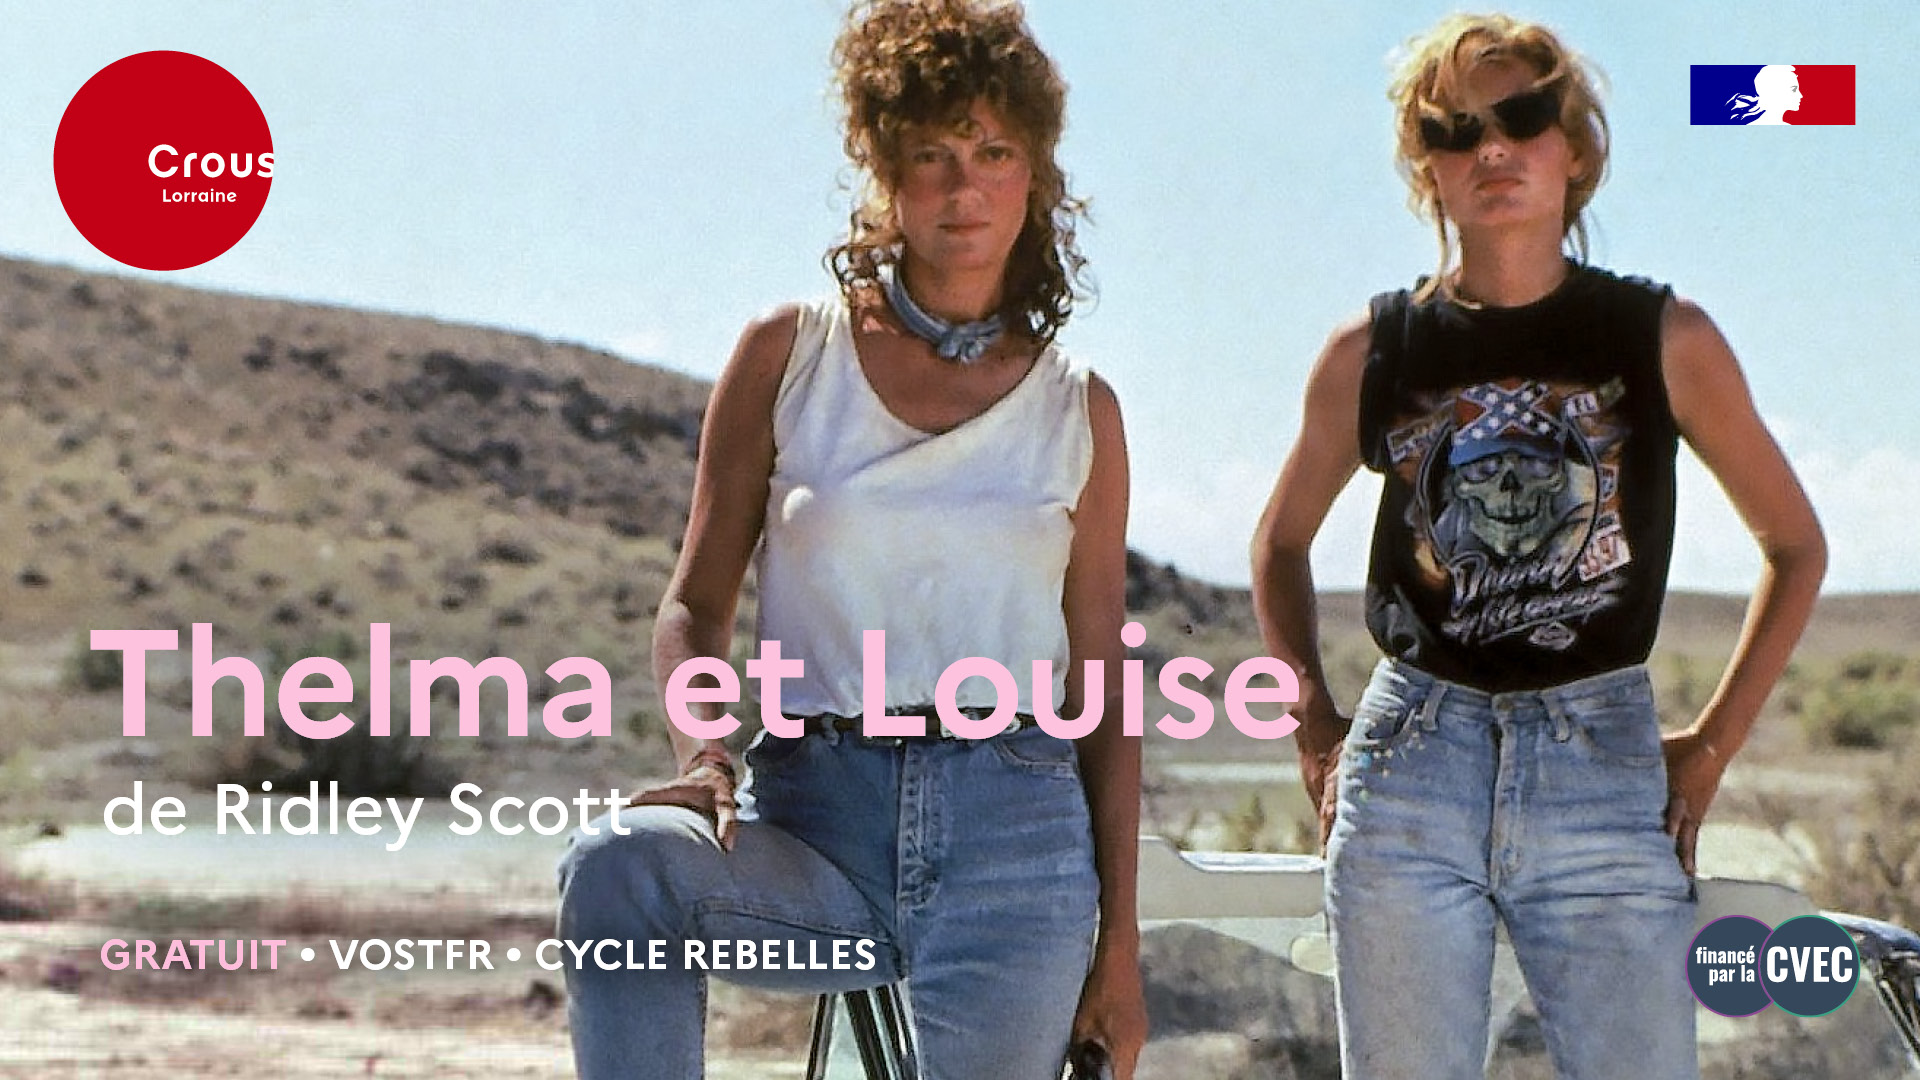 You are currently viewing CROUS Ciné-Club – Thelma et Louise